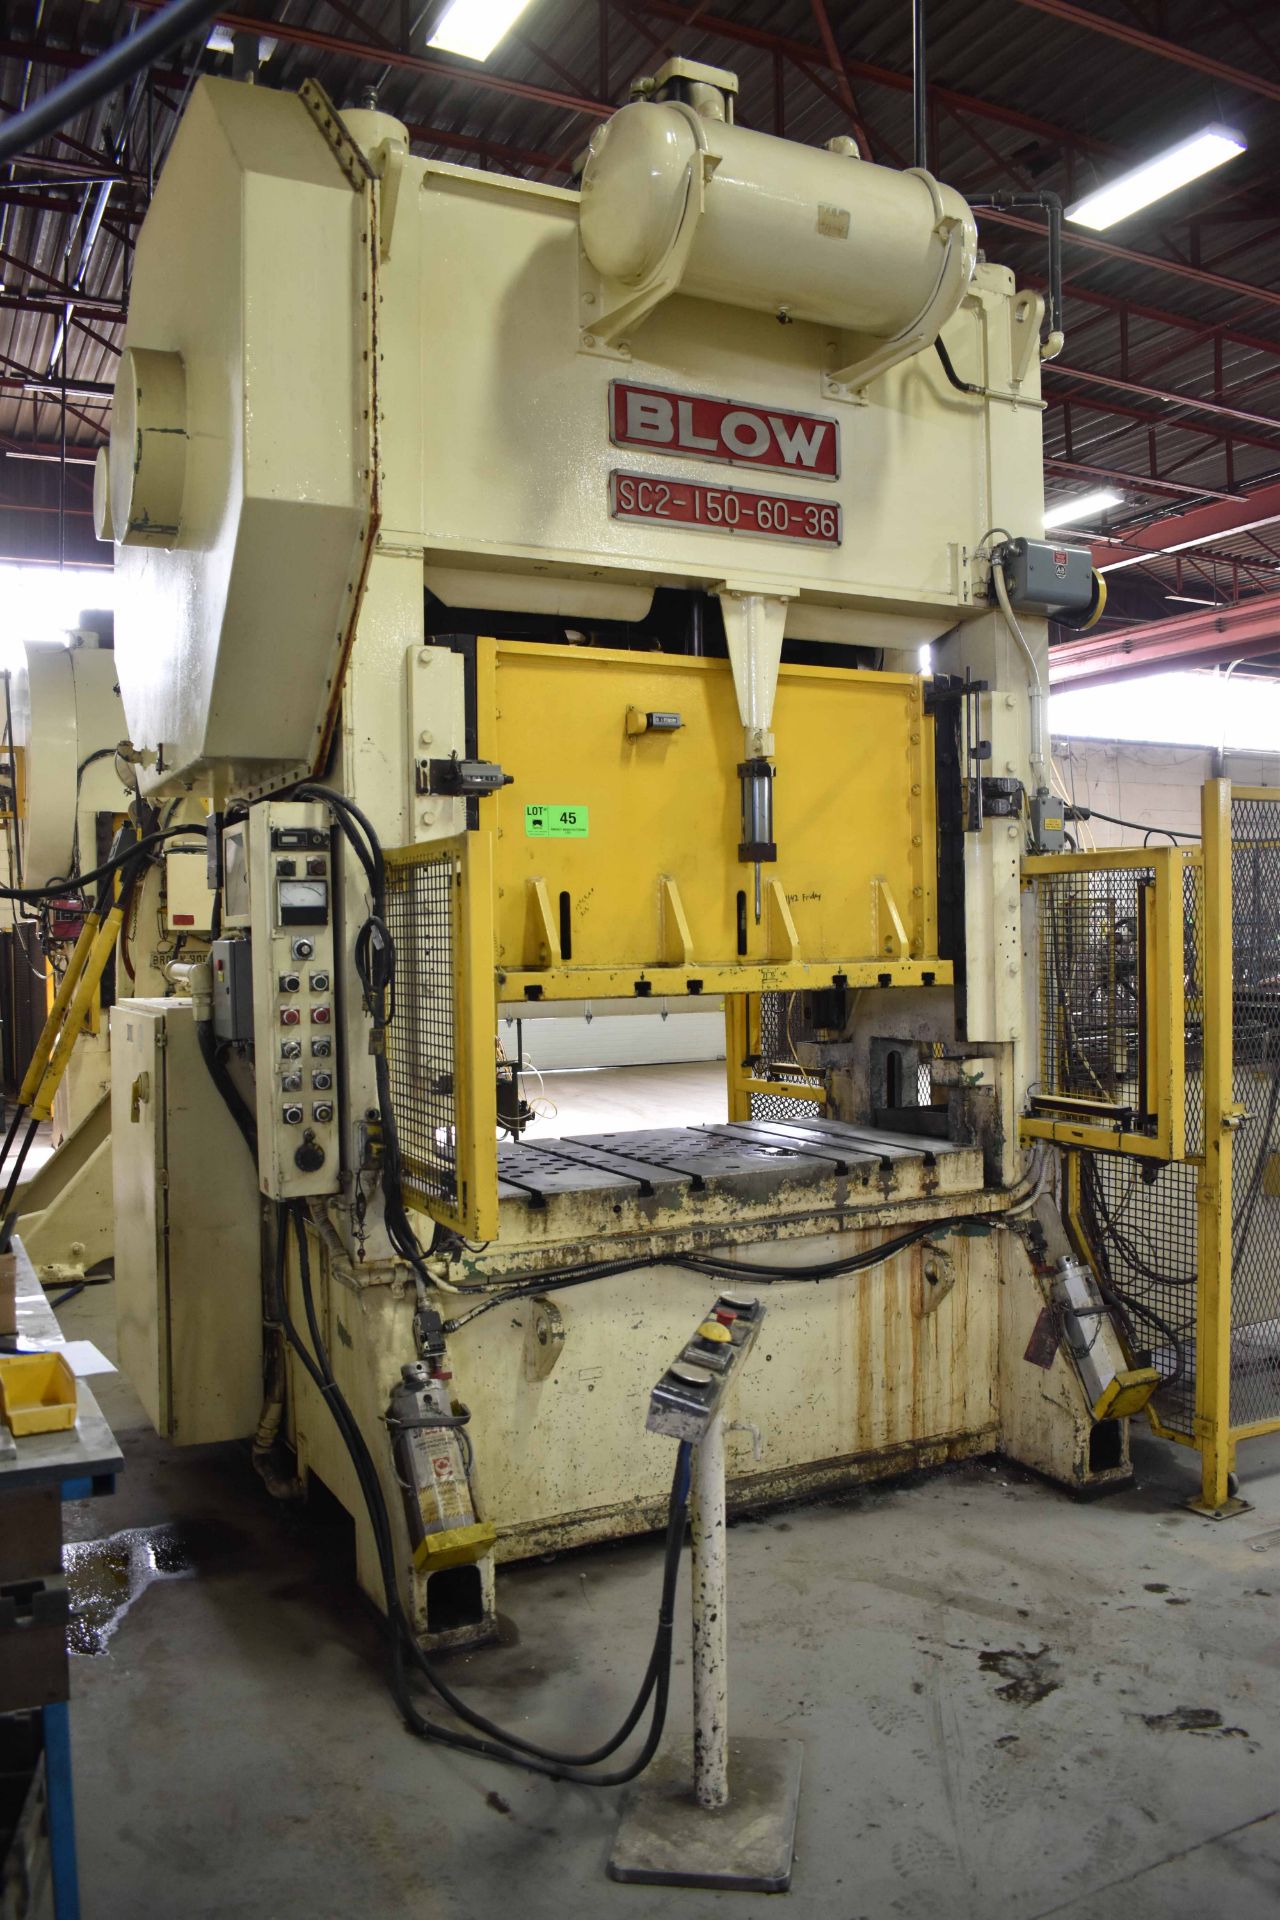 BLOW PRESS SC2-150-60-36 150 TON CAPACITY MECHANICAL SINGLE CRANK STRAIGHT SIDE PRESS WITH 6" - Image 2 of 6